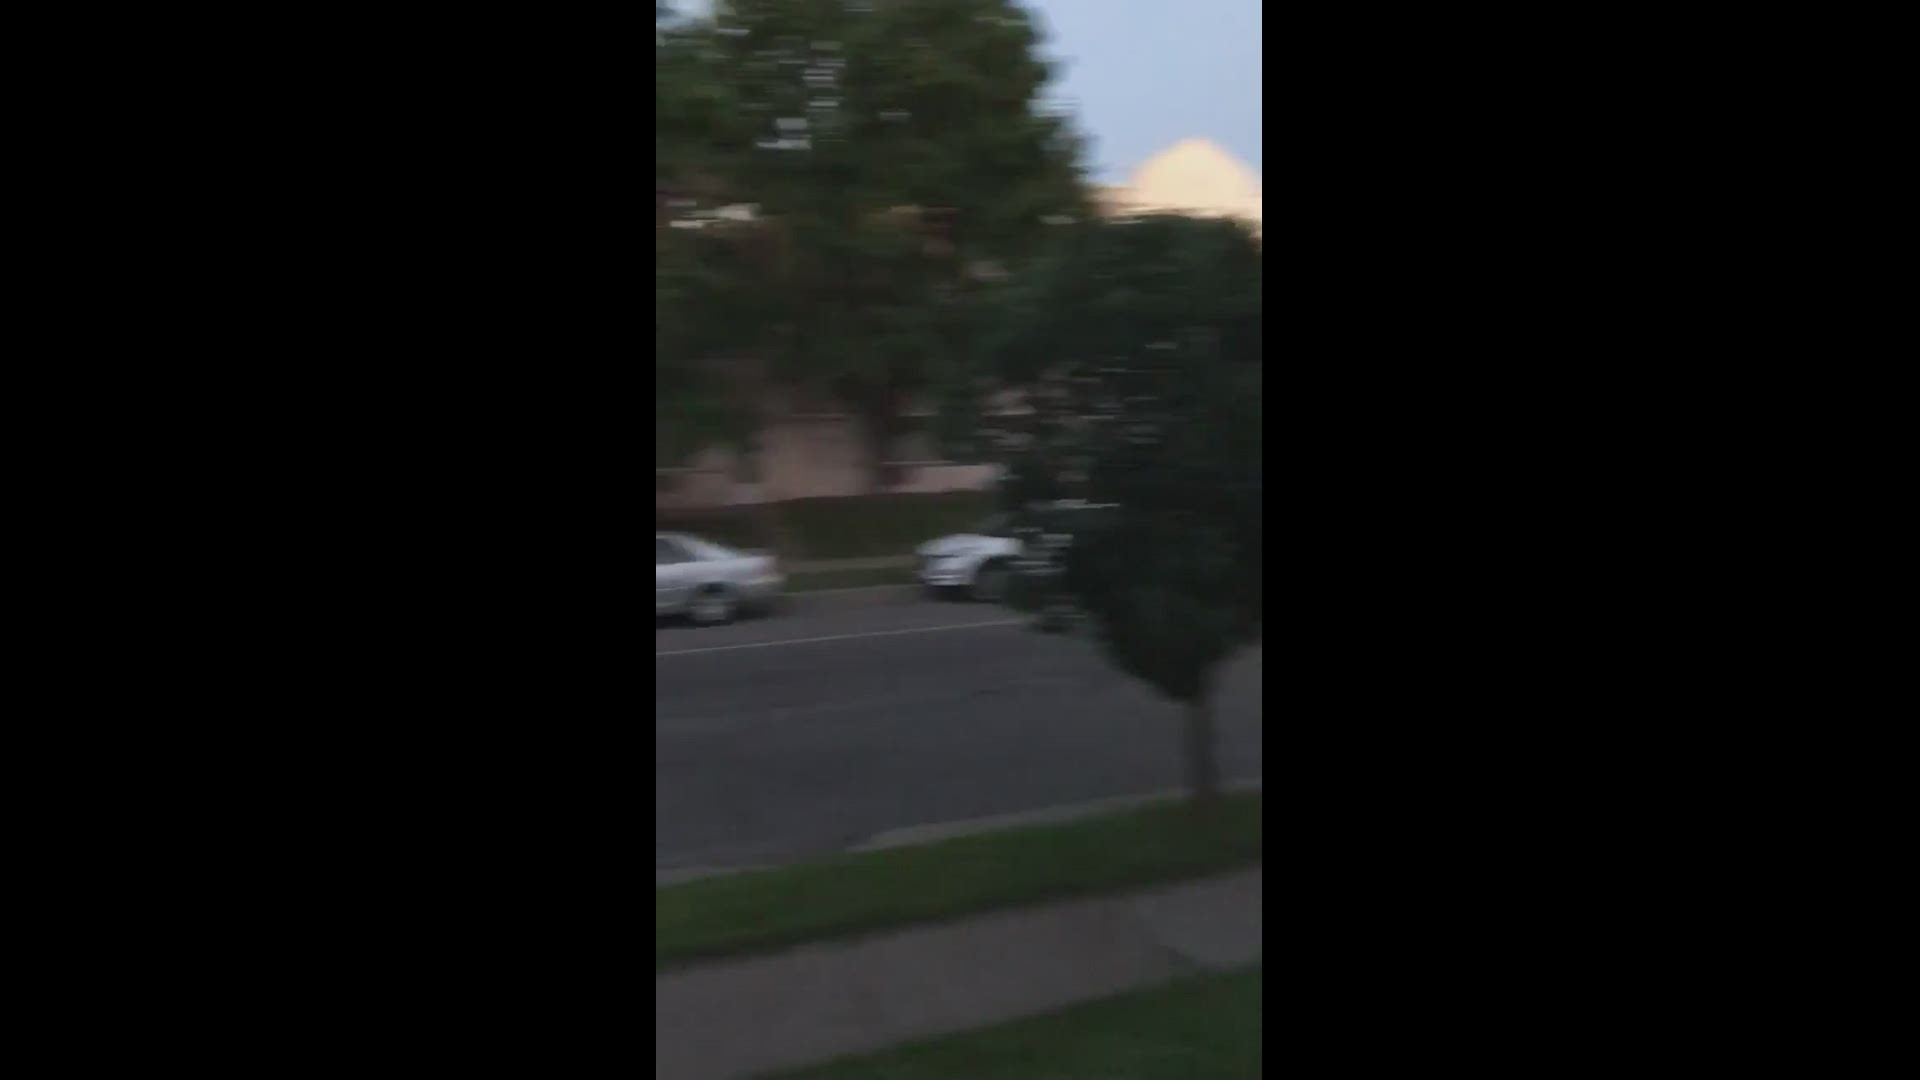 Video contains some adult language. Law enforcement officers shot paint canisters along a Whittier street May 30, 2020. Video provided by Tanya Kerssen.